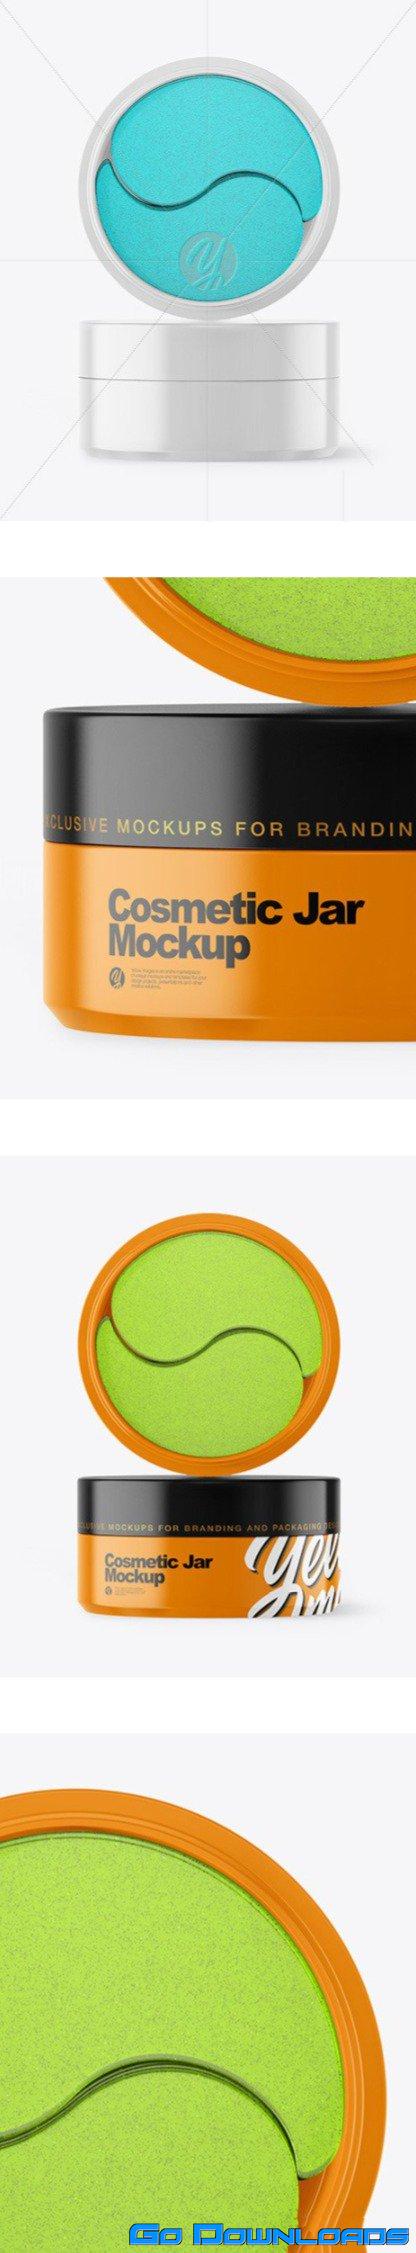 Glossy Cosmetic Jar with Patches Mockup 70425